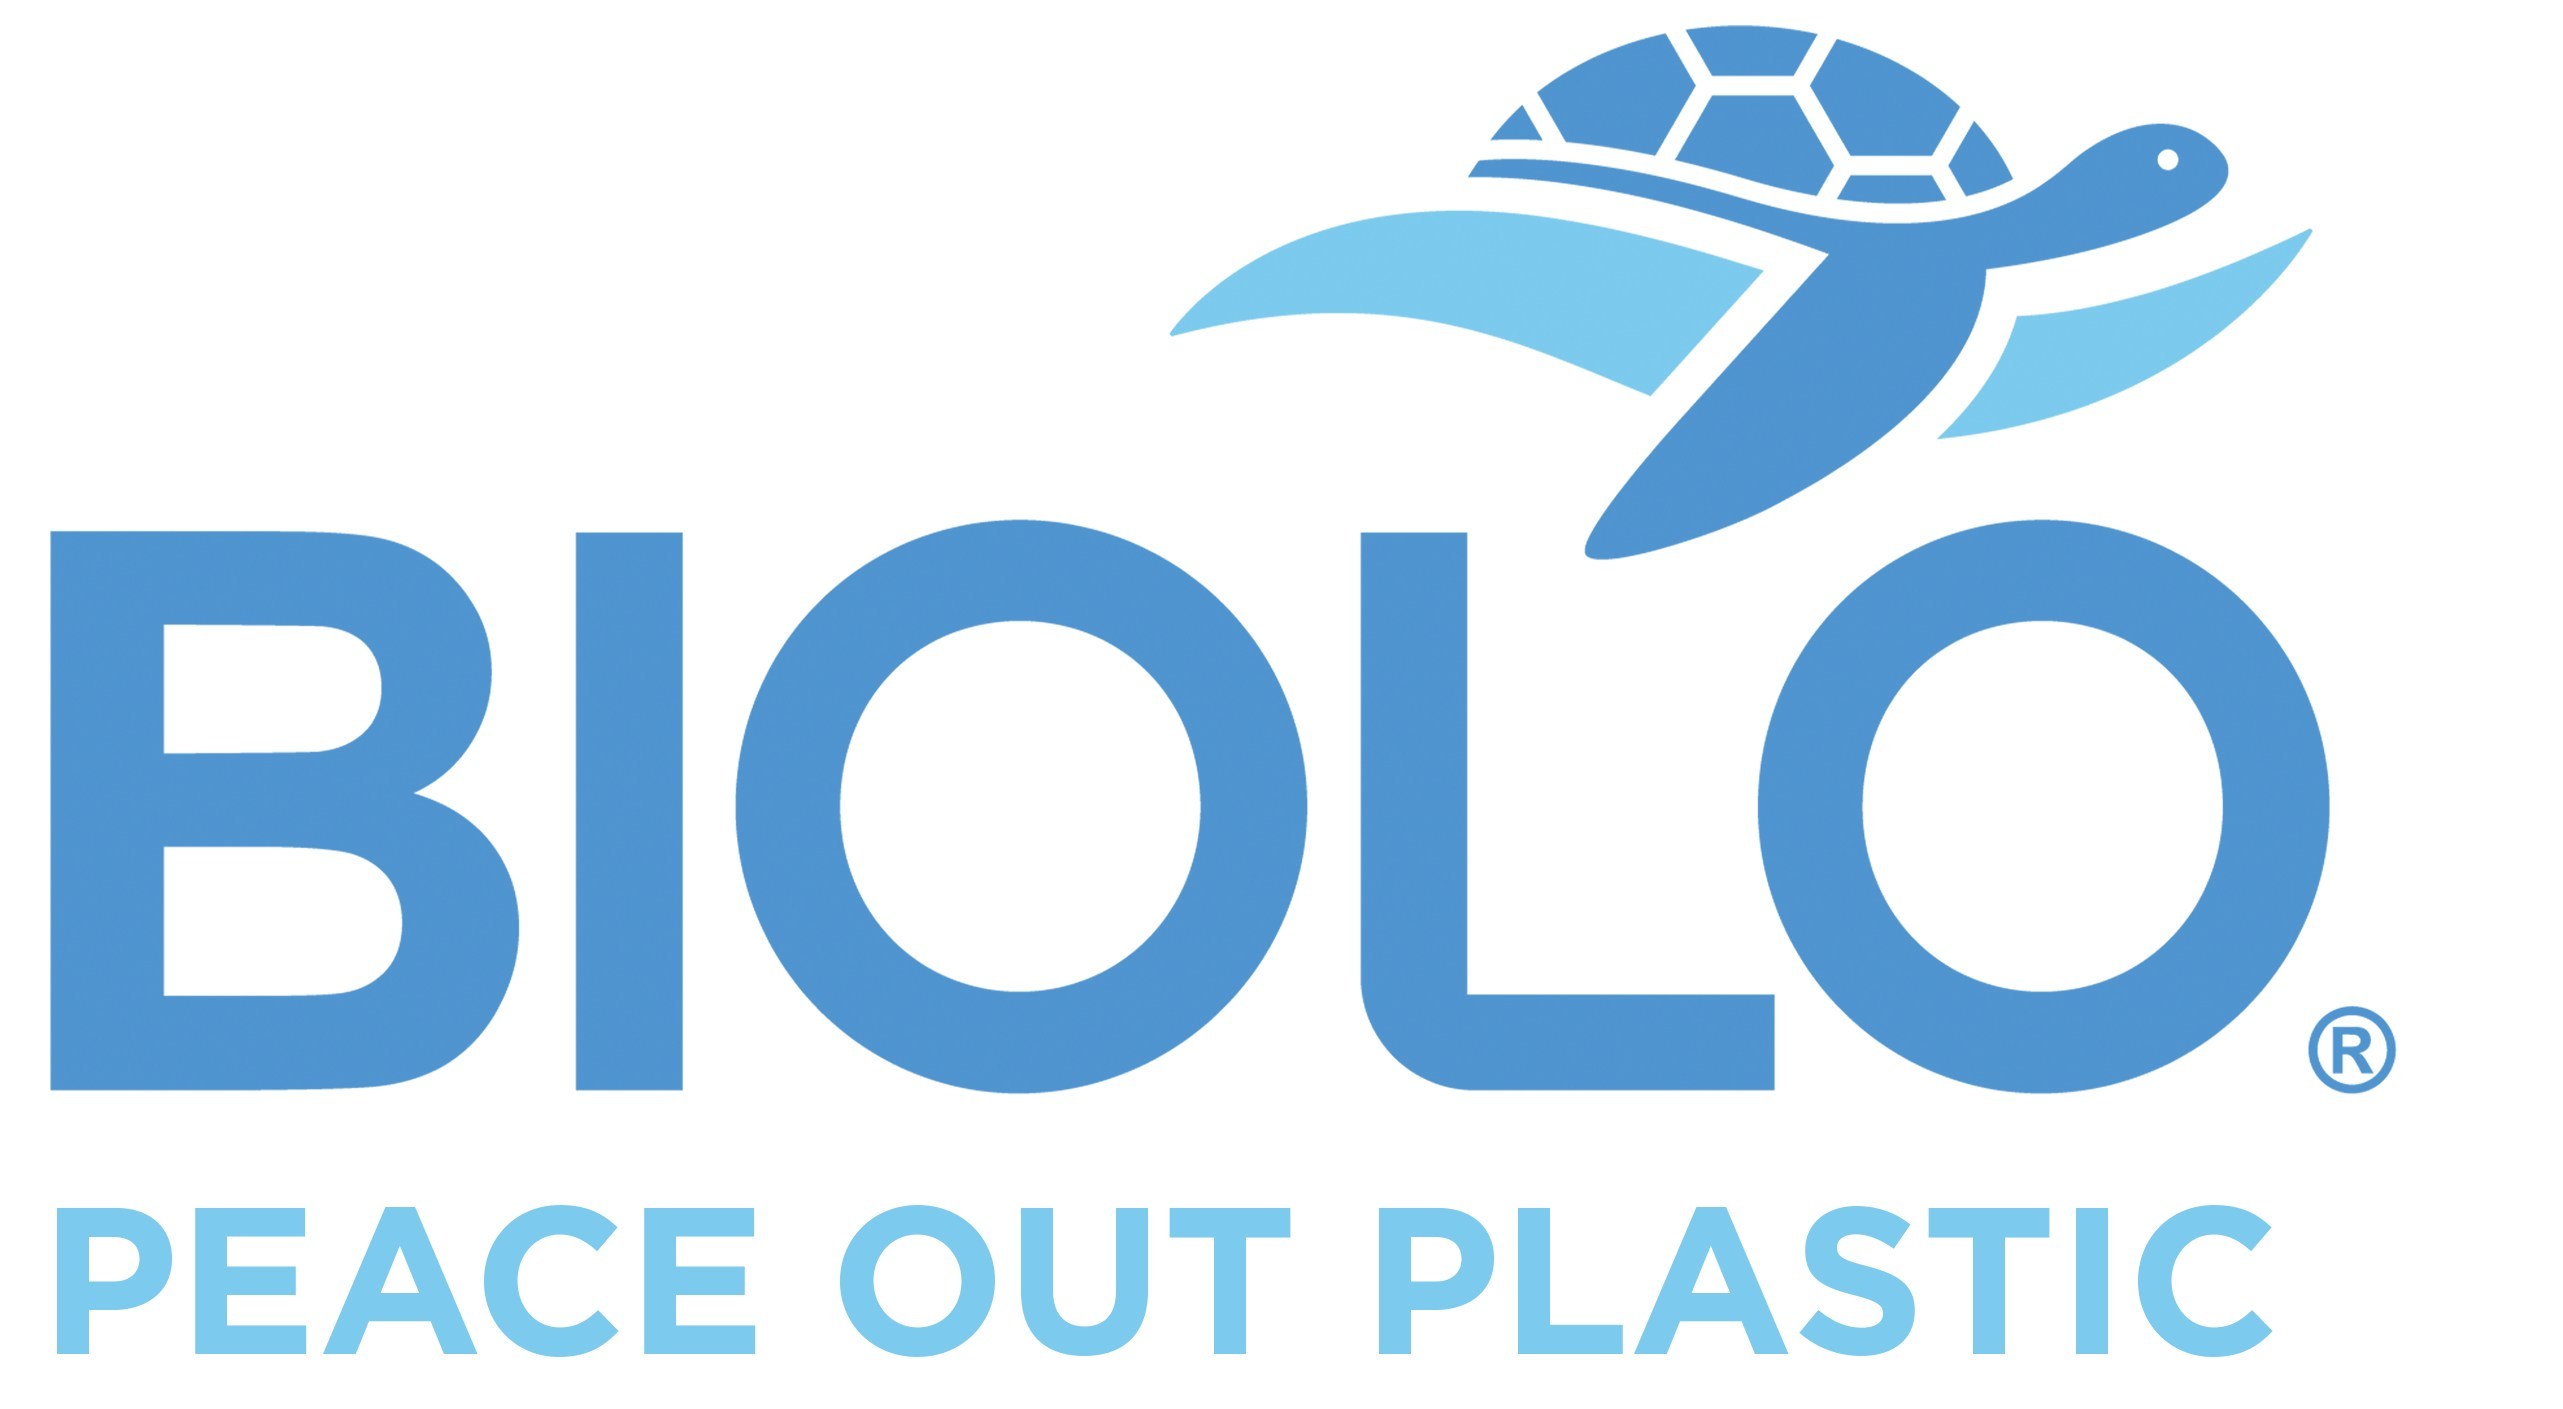 BIOLO is First to Market with Home Compostable Bags Made from Revolutionary New Plastic Alternative